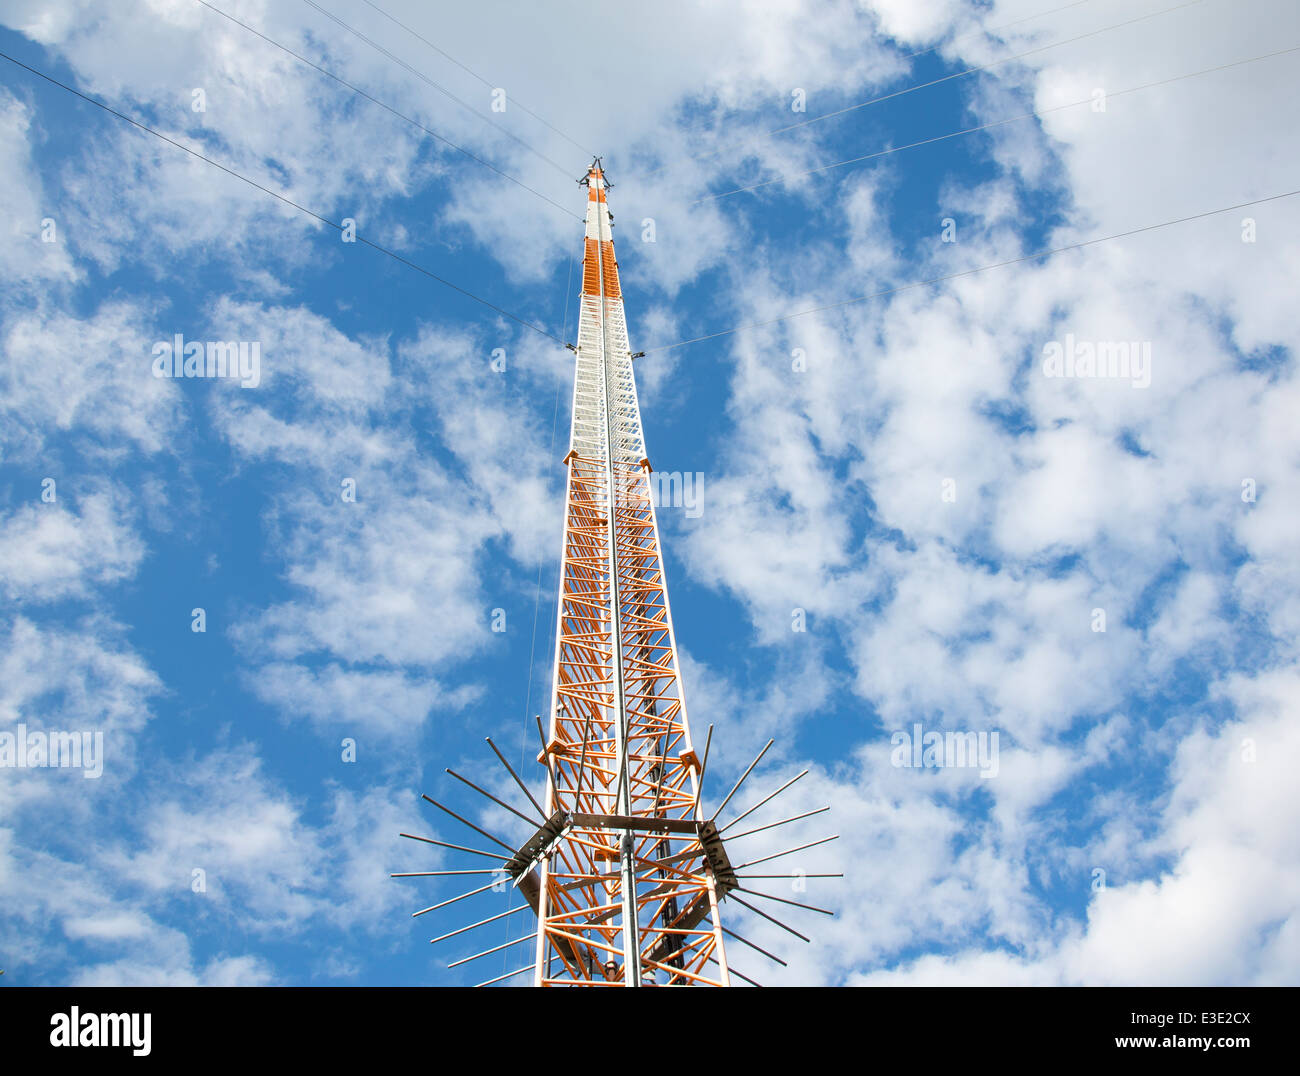 Metallic guyed telecommunications mast / tower containing cellular network antennas. Anti climb spikes at the bottom of the mast. , Finland Stock Photo